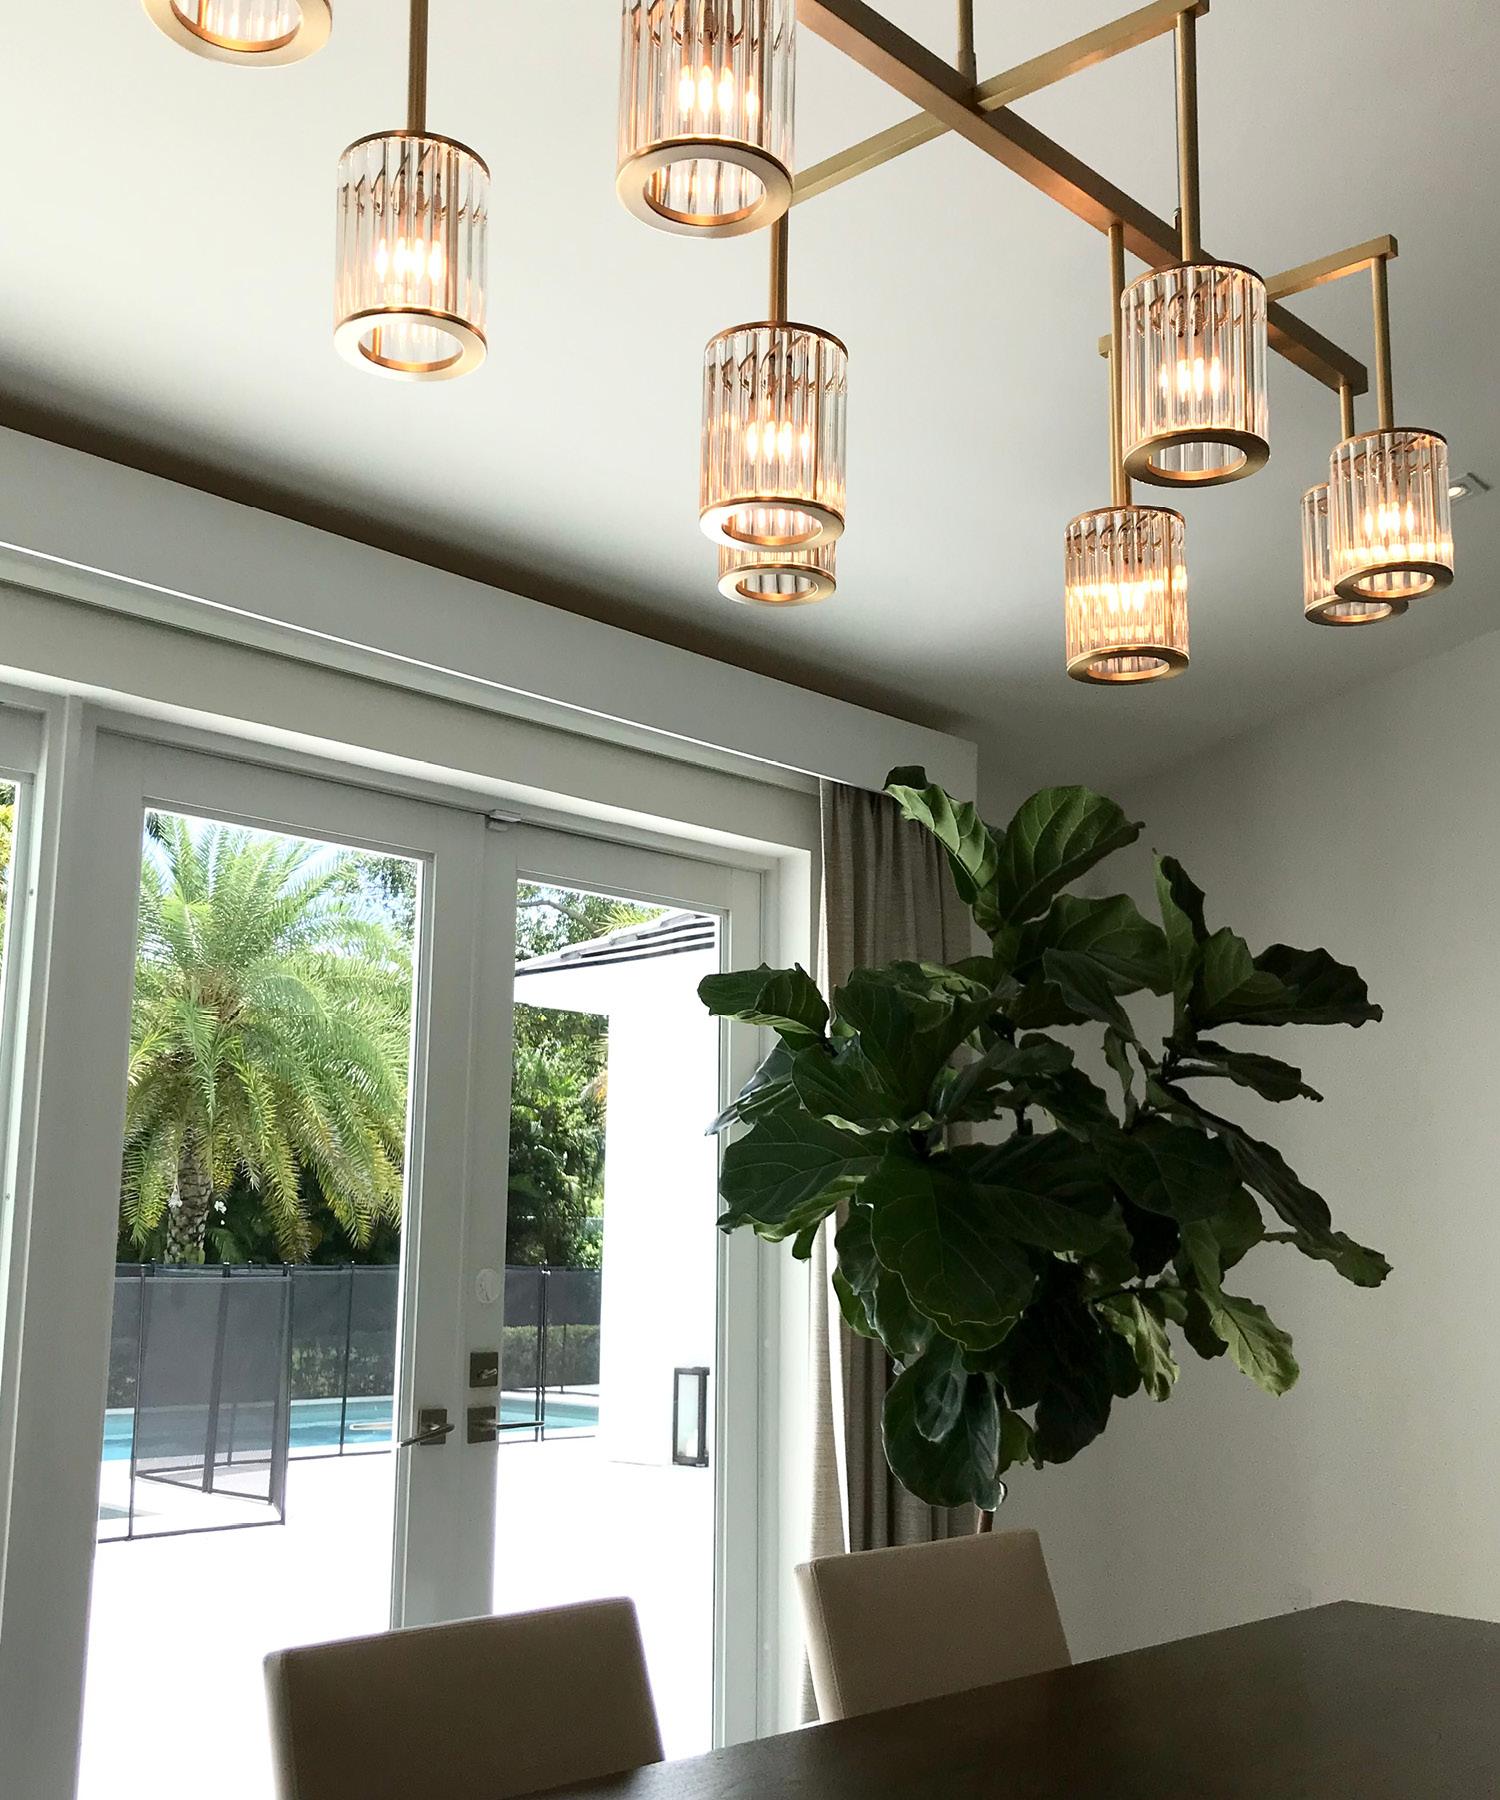 Aluminum Flute Beam Chandelier with 16 Arms in Powdercoat with Frosted Glass Diffusers